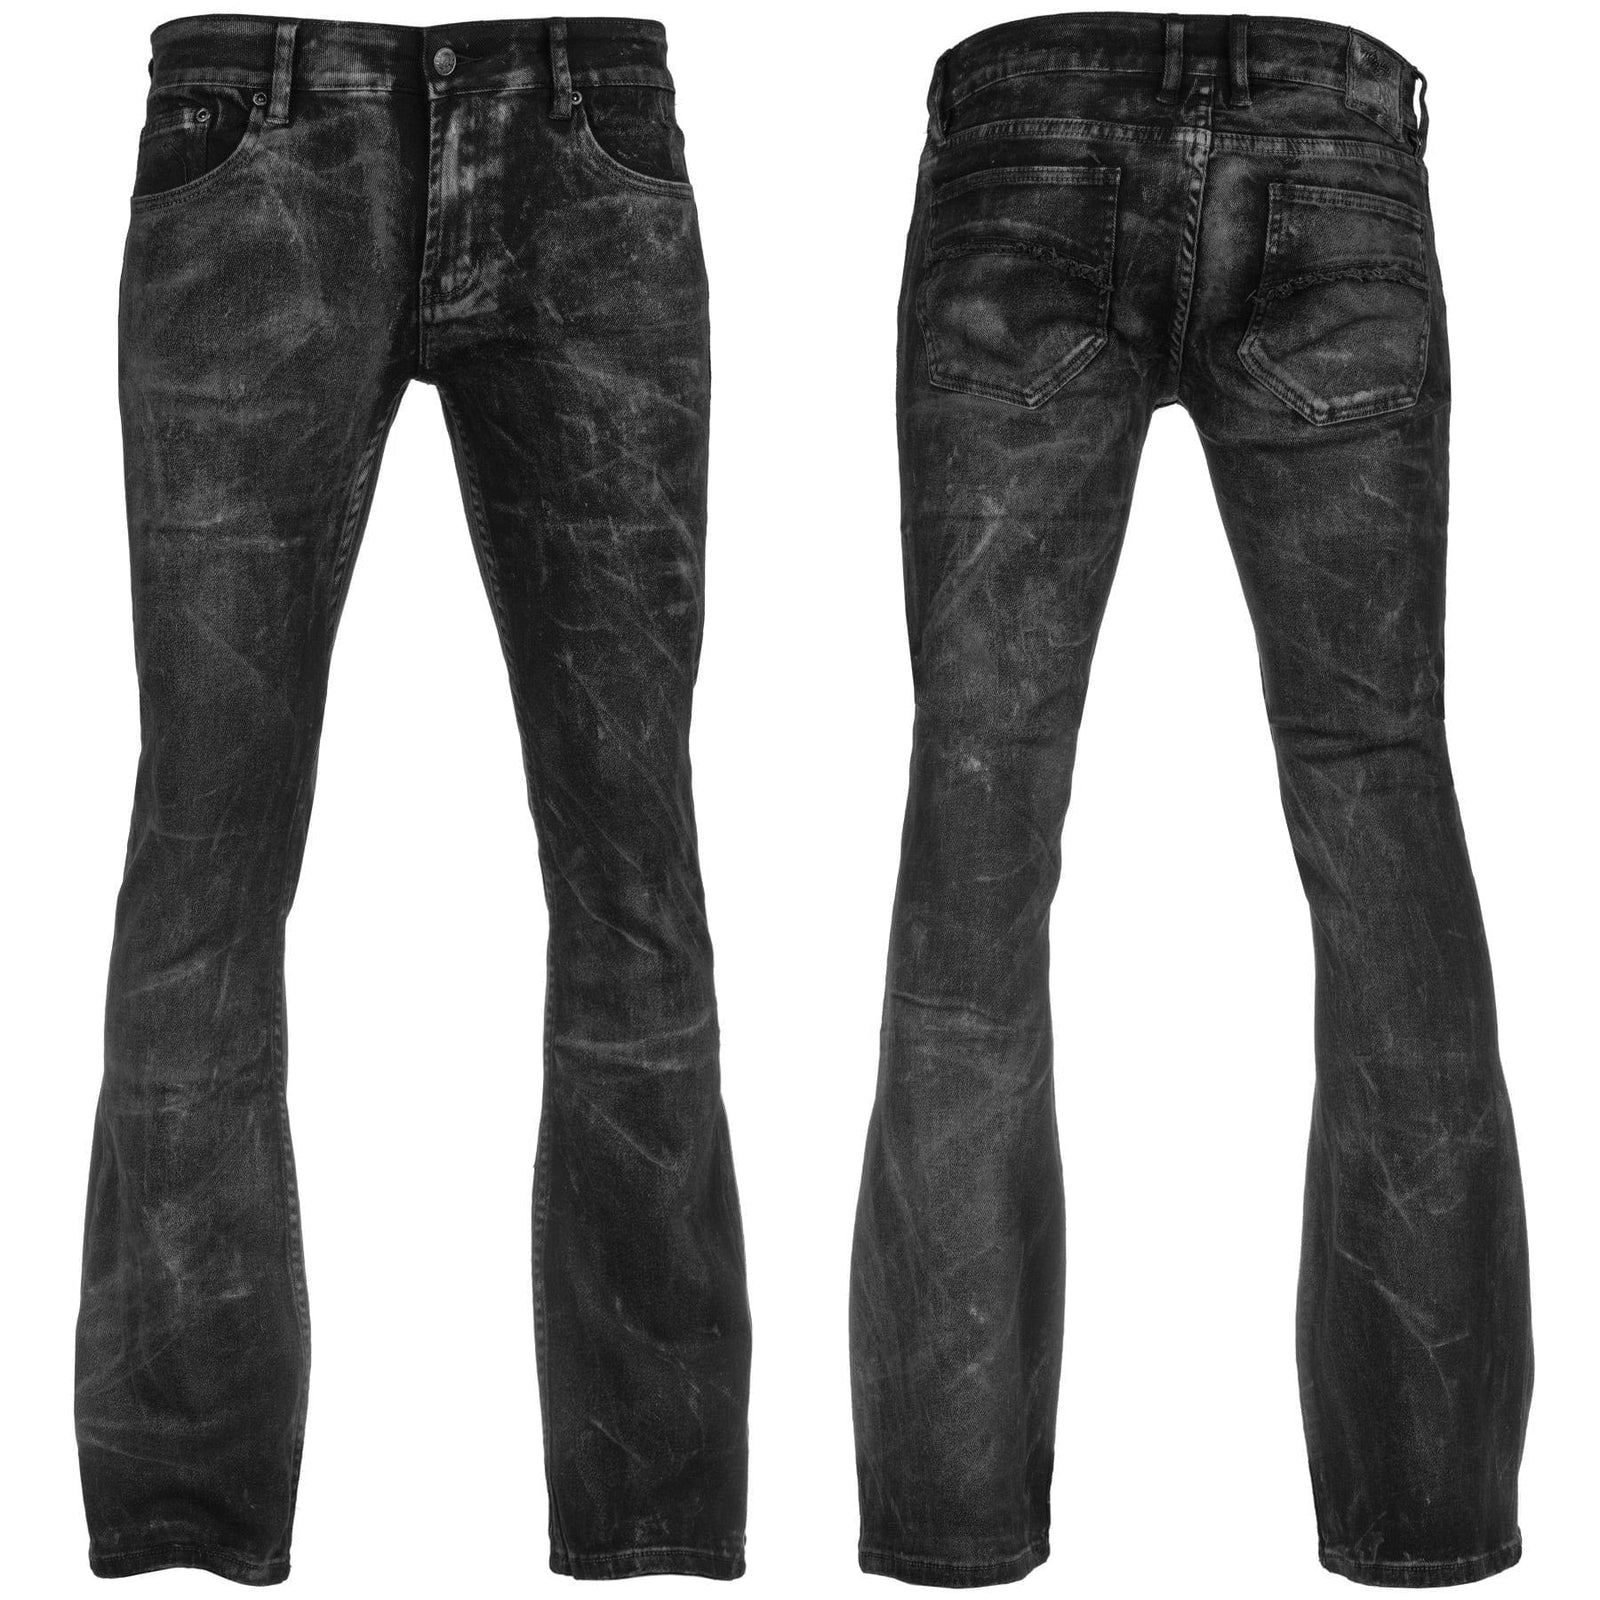 Wornstar Clothing Rampager Waxed Denim Stage Jeans